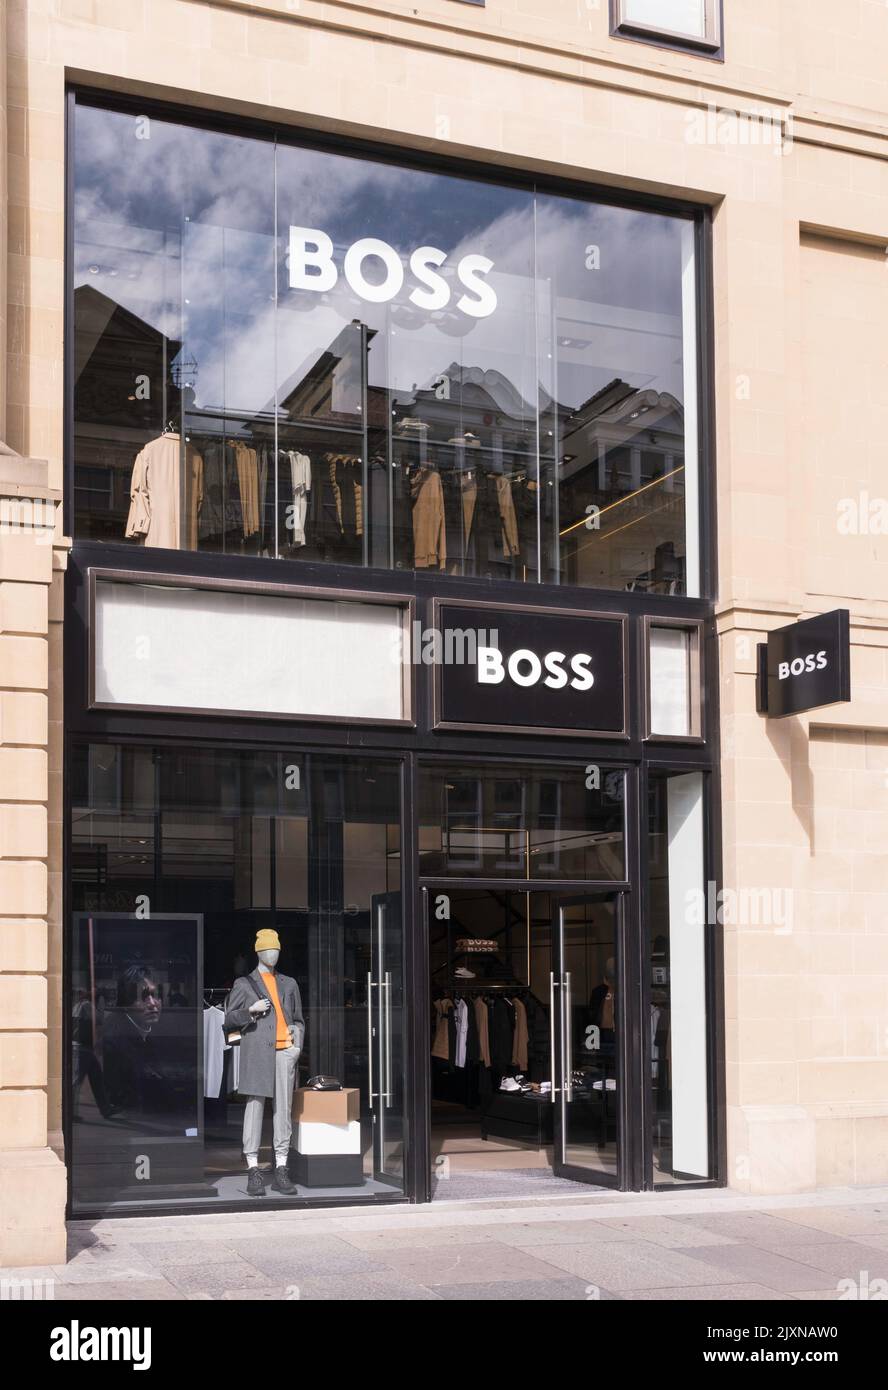 The BOSS store in Newcastle upon Tyne, England, UK Stock Photo